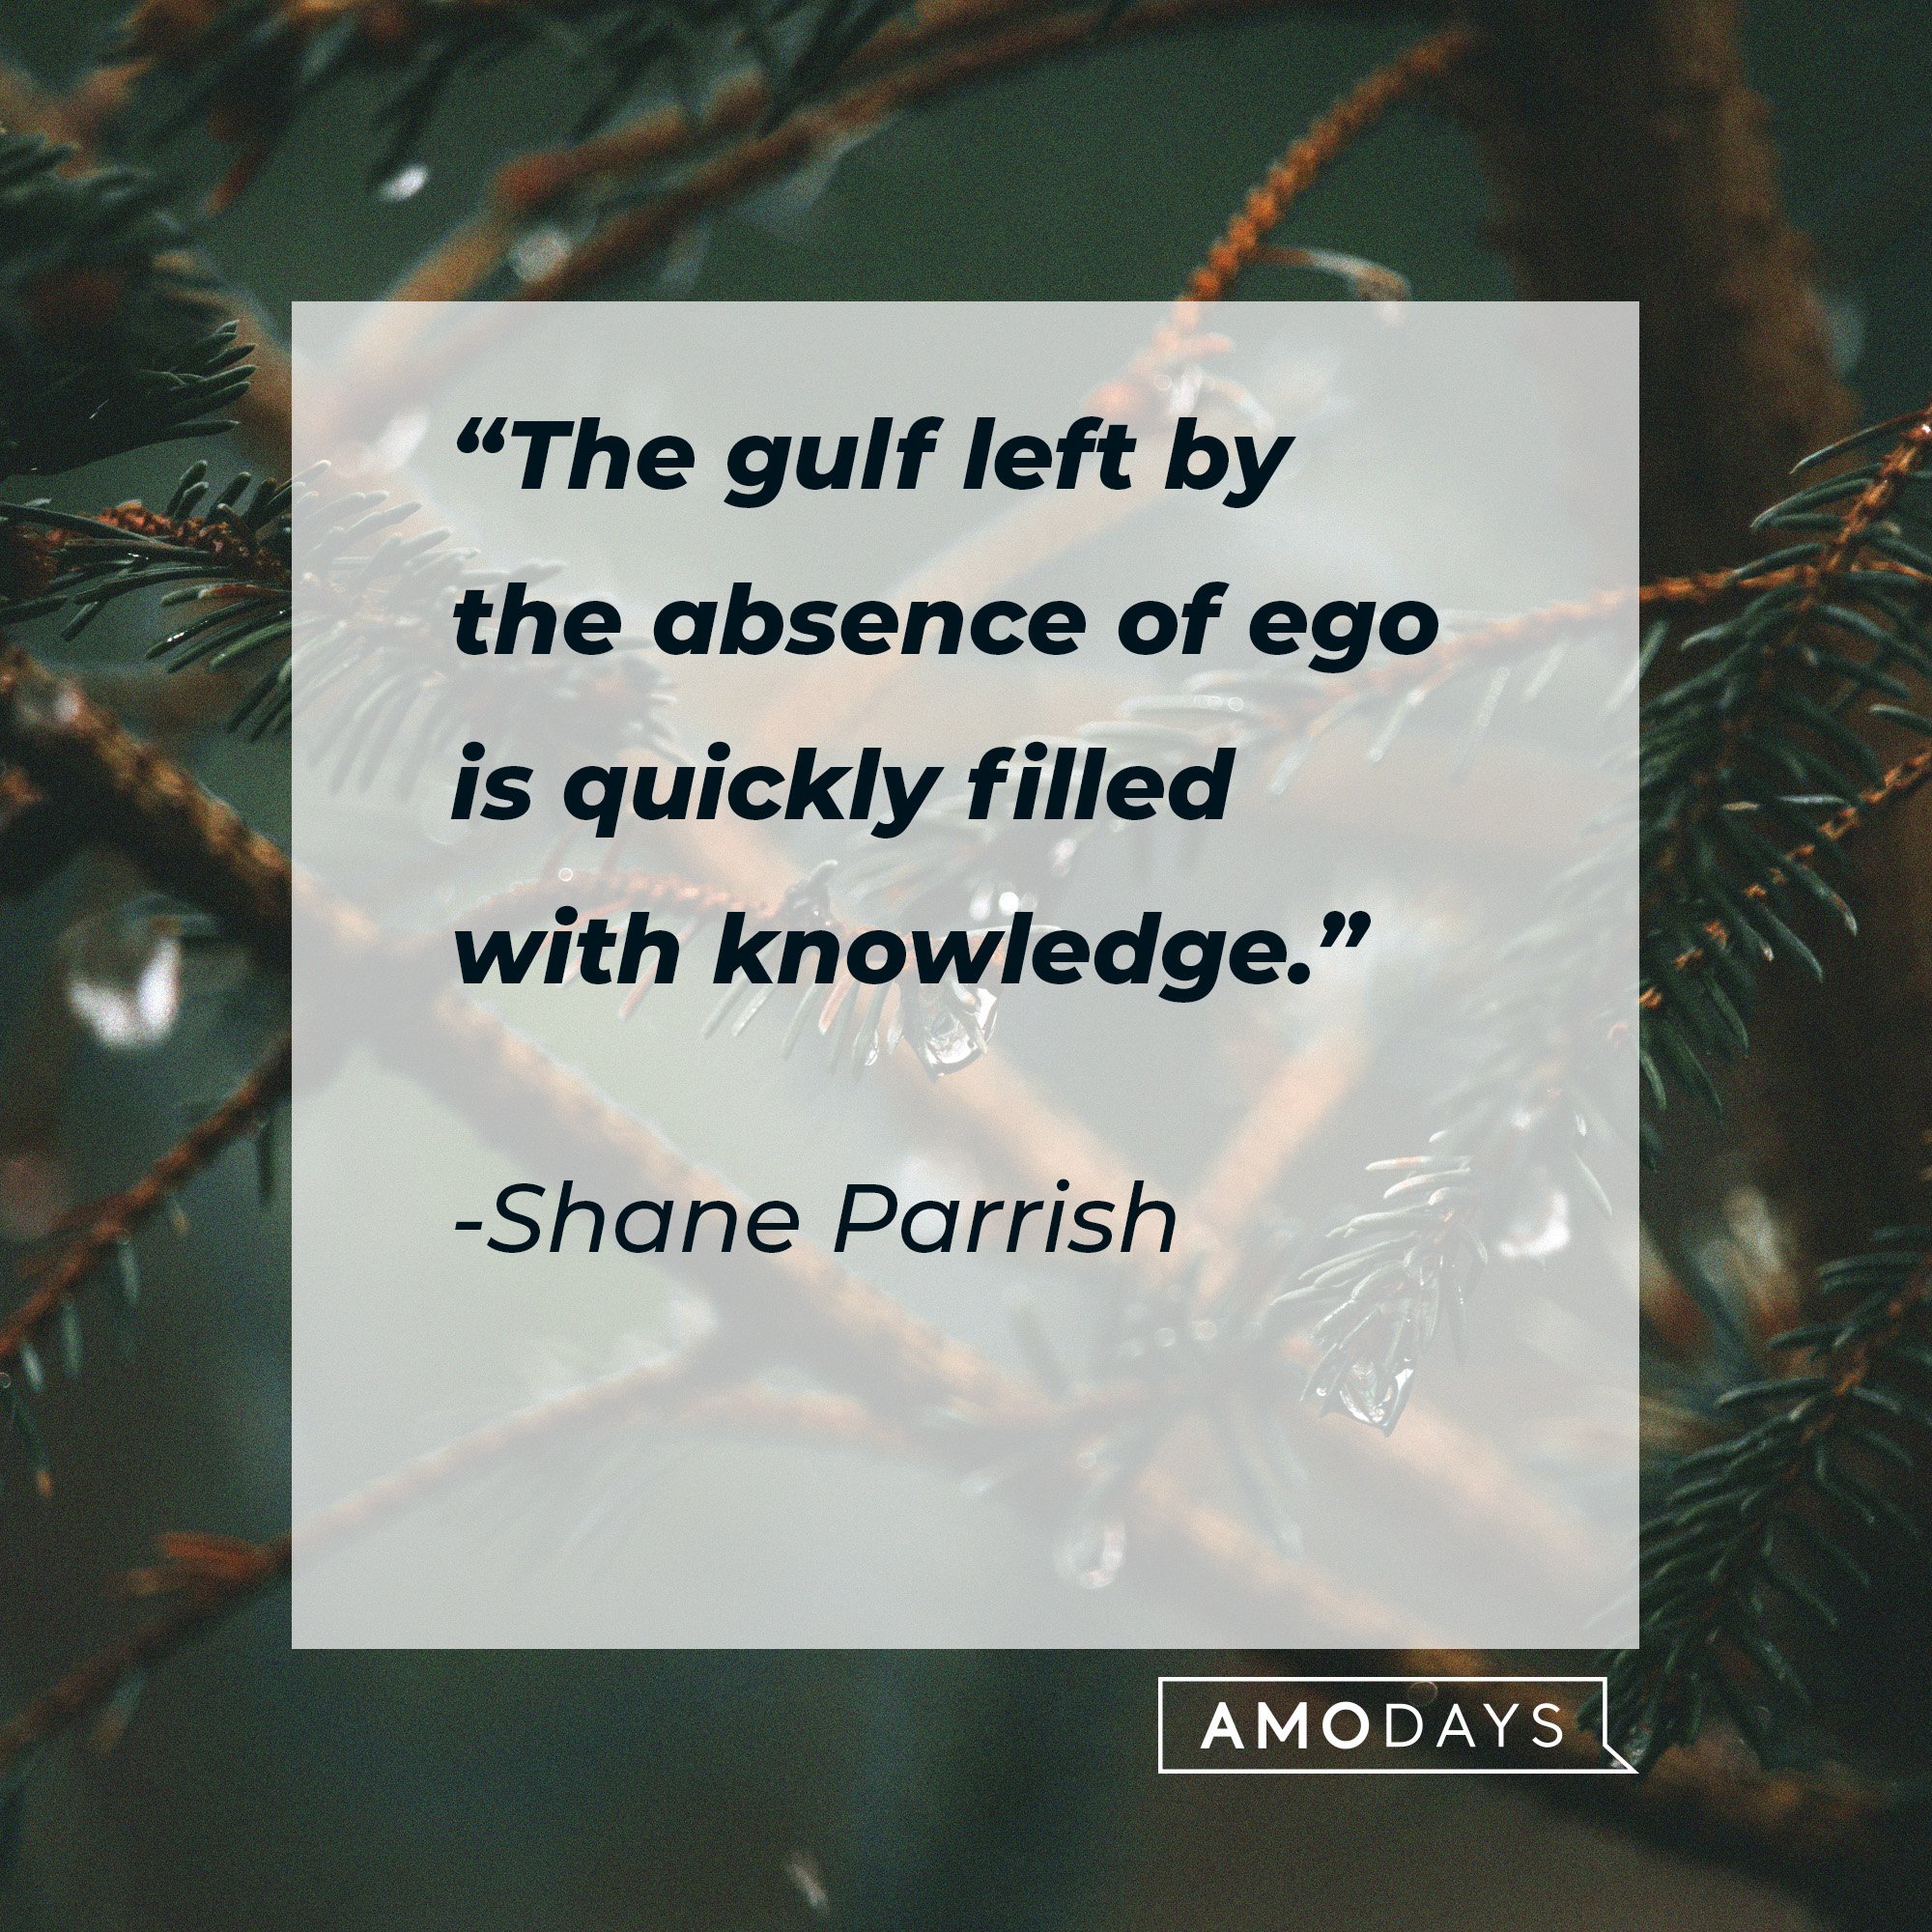  Shane Parrish's quote: “The gulf left by the absence of ego is quickly filled with knowledge.” | Image: AmoDays